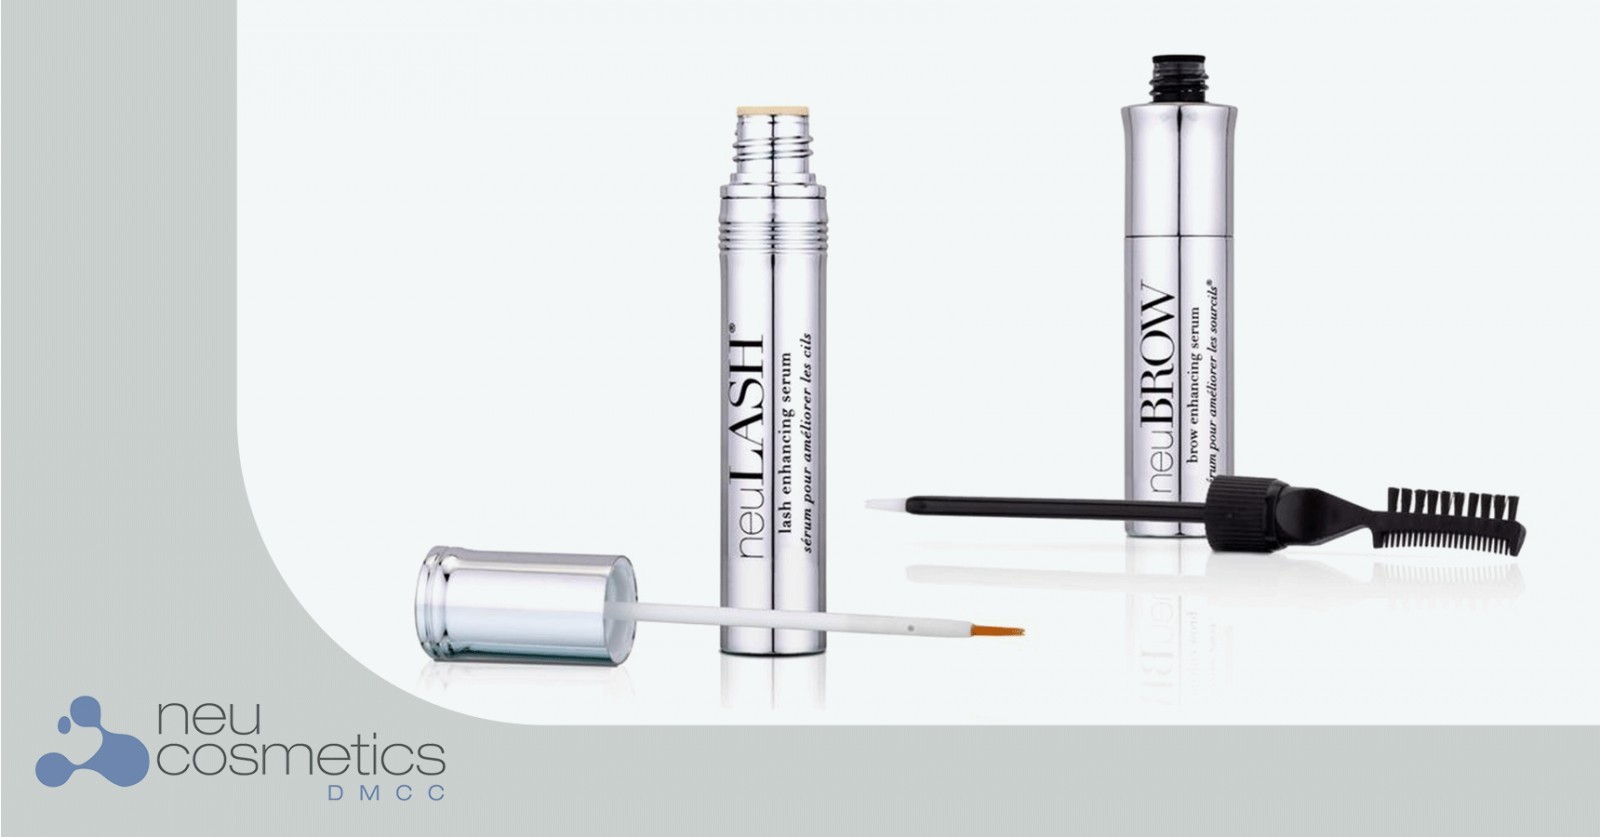 neuBROW and nueLASH Enhancing Serums promote fuller, healthier-looking brows and lashes.